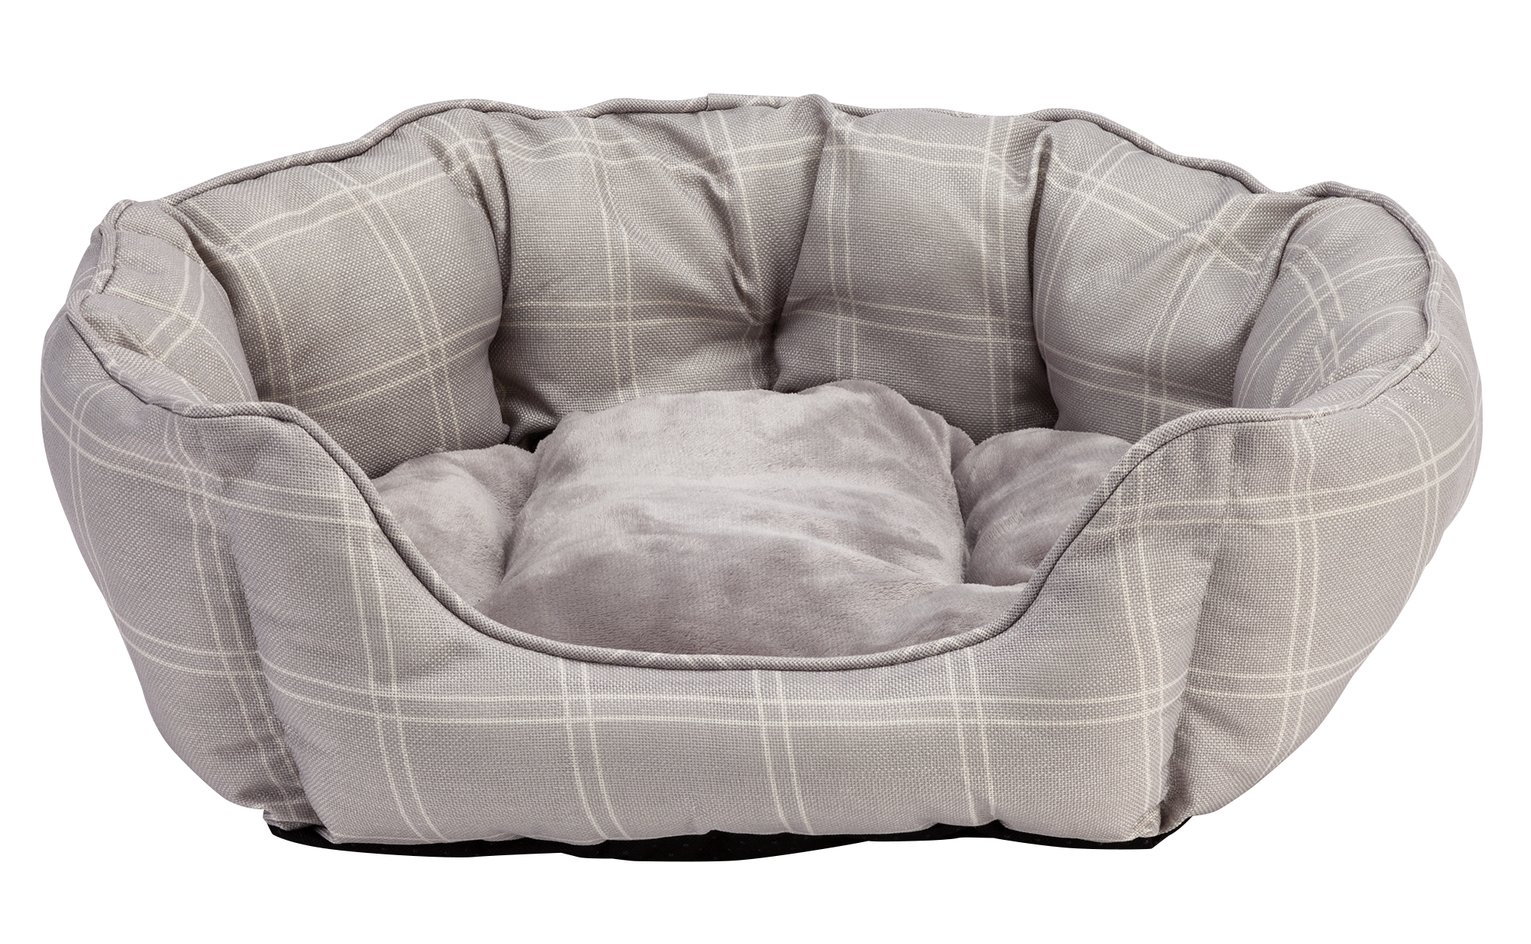 Country Check Oval Pet Bed - Medium